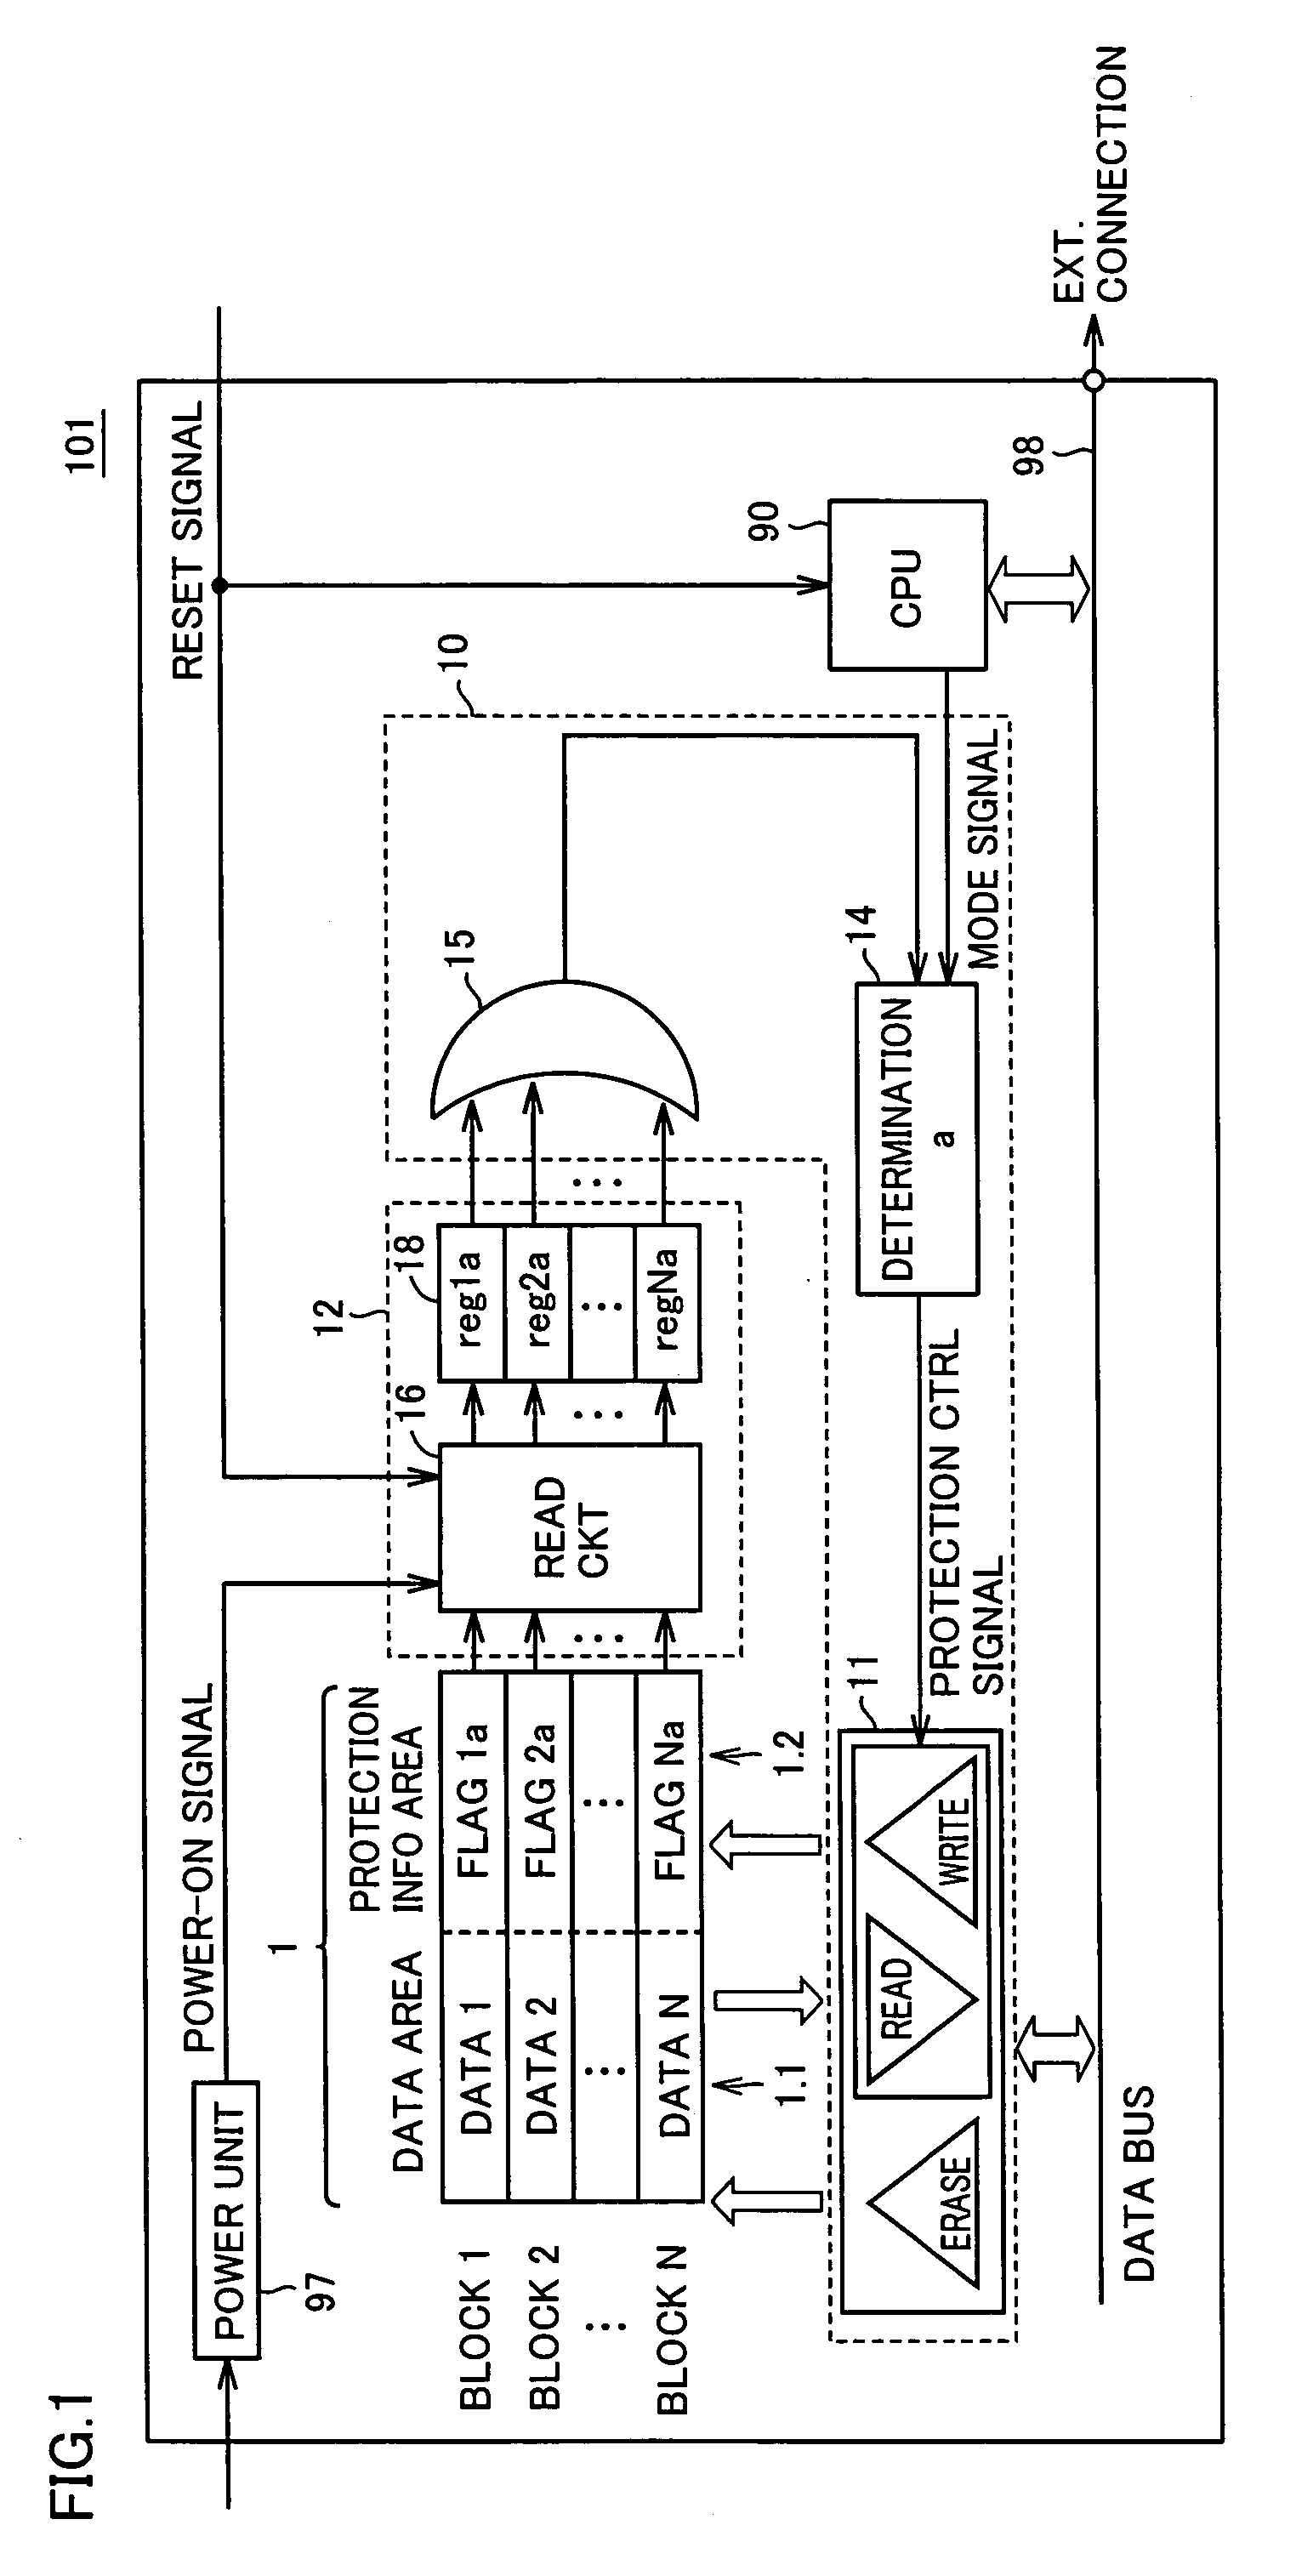 Data protection for non-volatile semiconductor memory using block protection flags